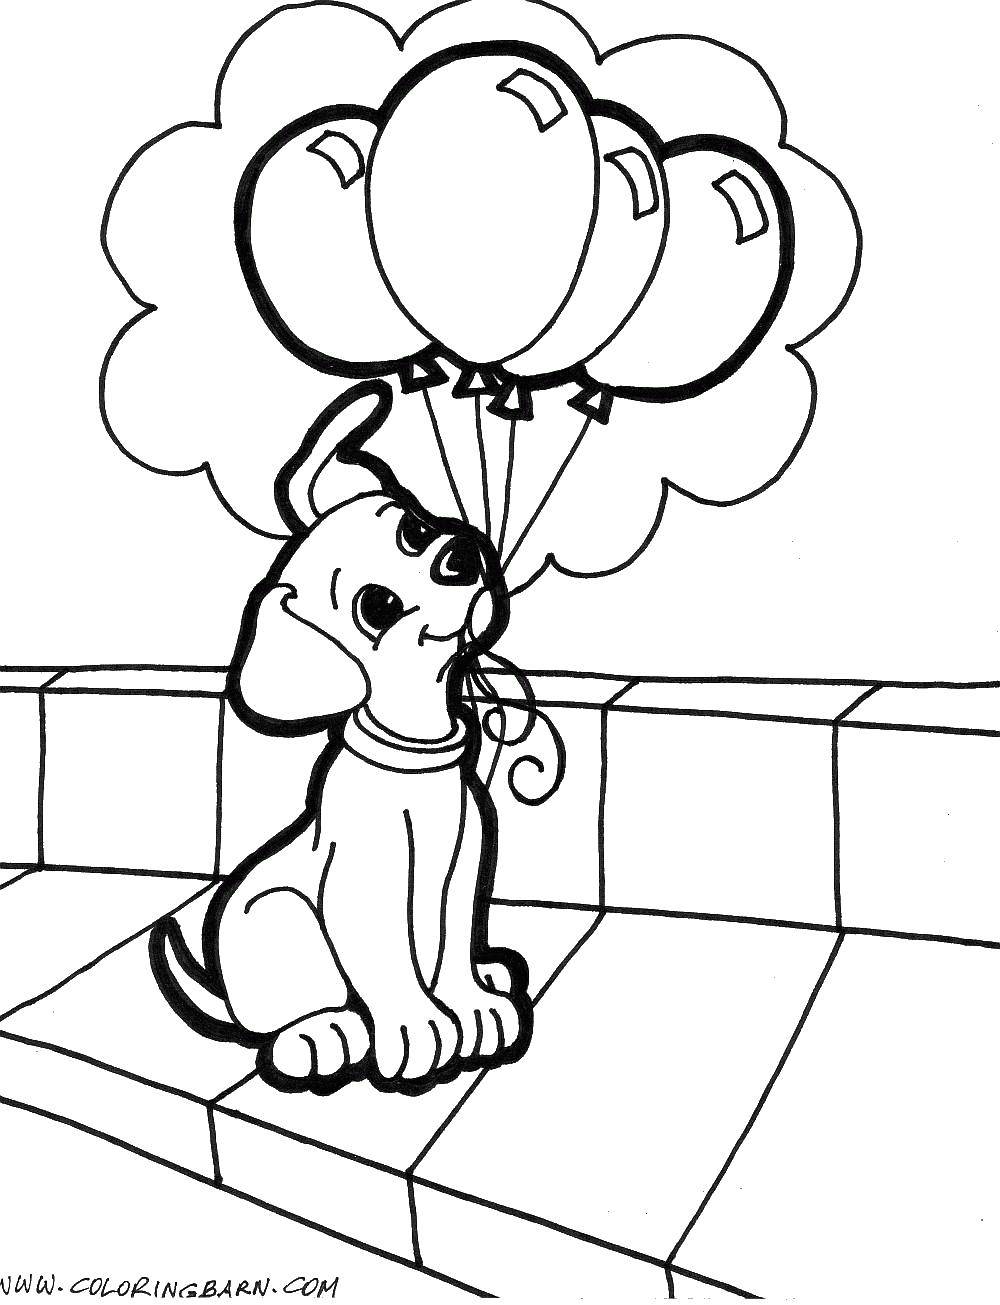 Coloring Dog with balloons. Category Animals. Tags:  animals, dog, puppy, dog.